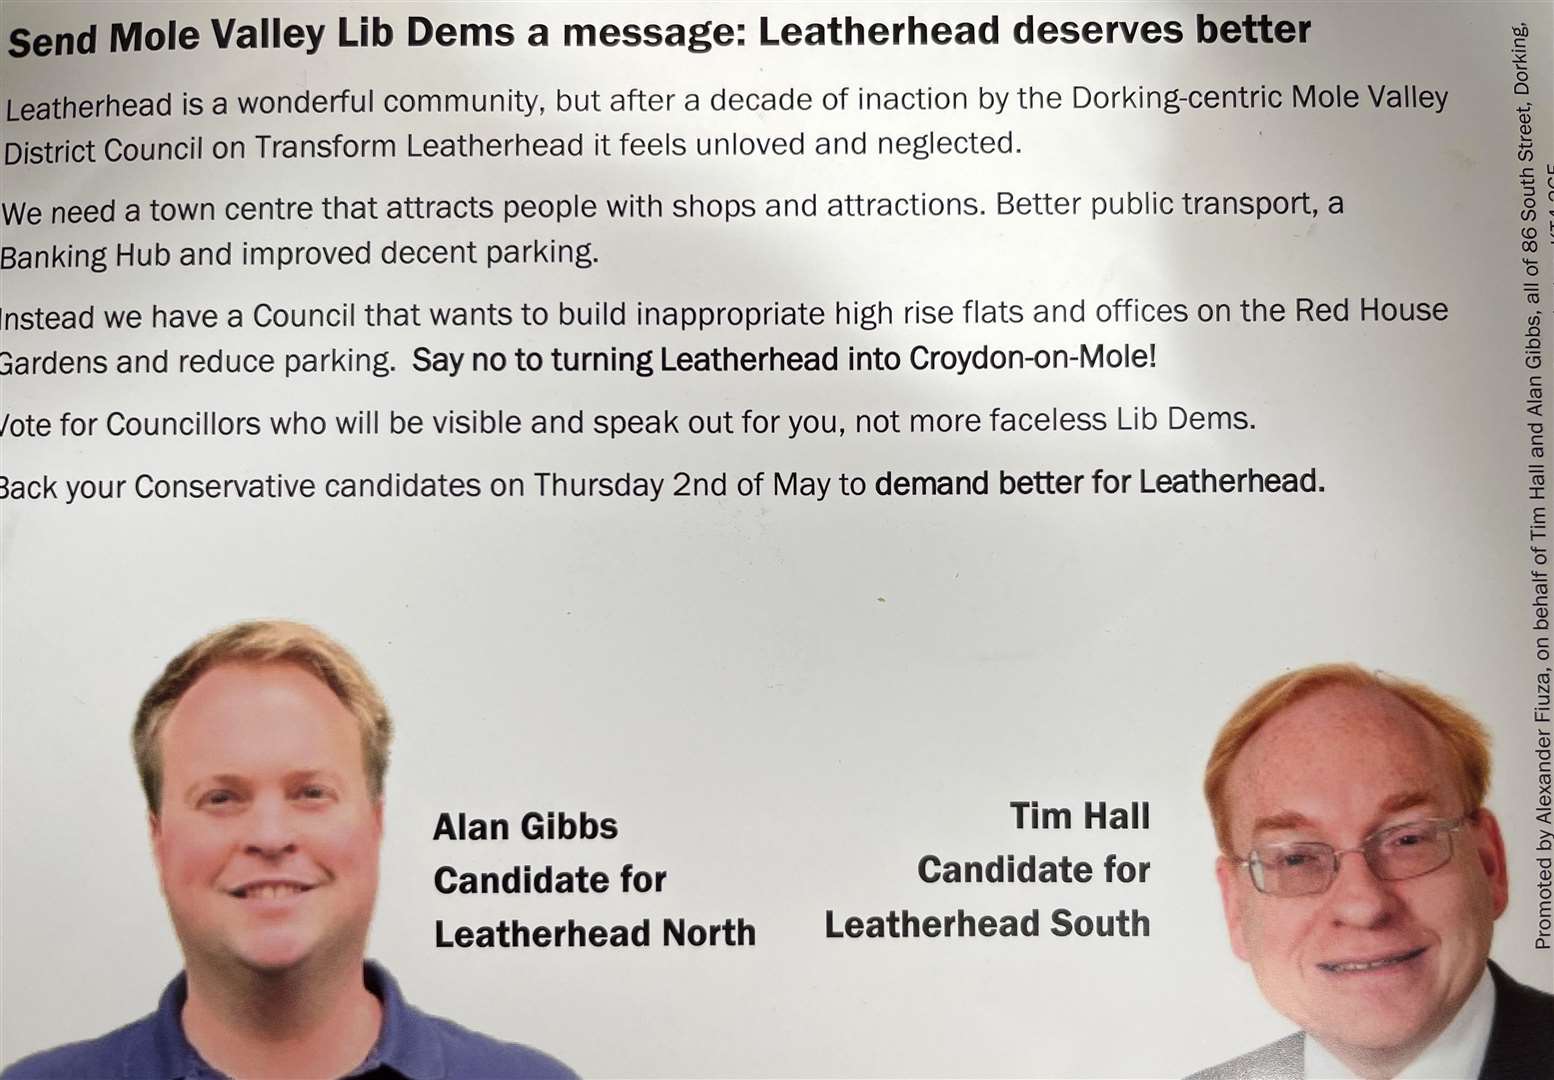 Campaign literature for Alan Gibbs and Cllr Tim Hall on Mole Valley District Council, Surrey